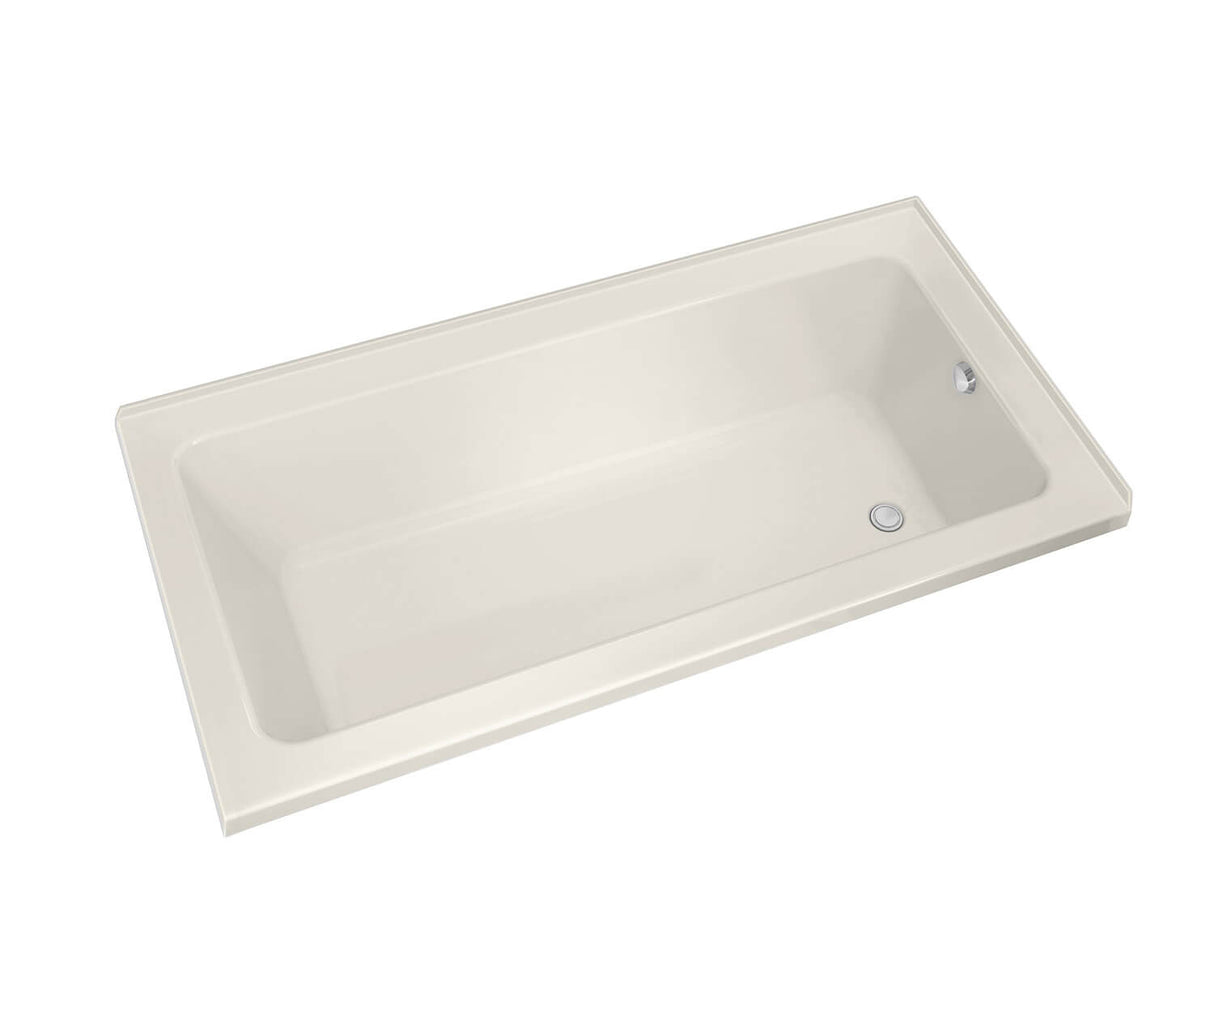 MAAX 106200-R-000-007 Pose 6030 IF Acrylic Corner Right Right-Hand Drain Bathtub in Biscuit